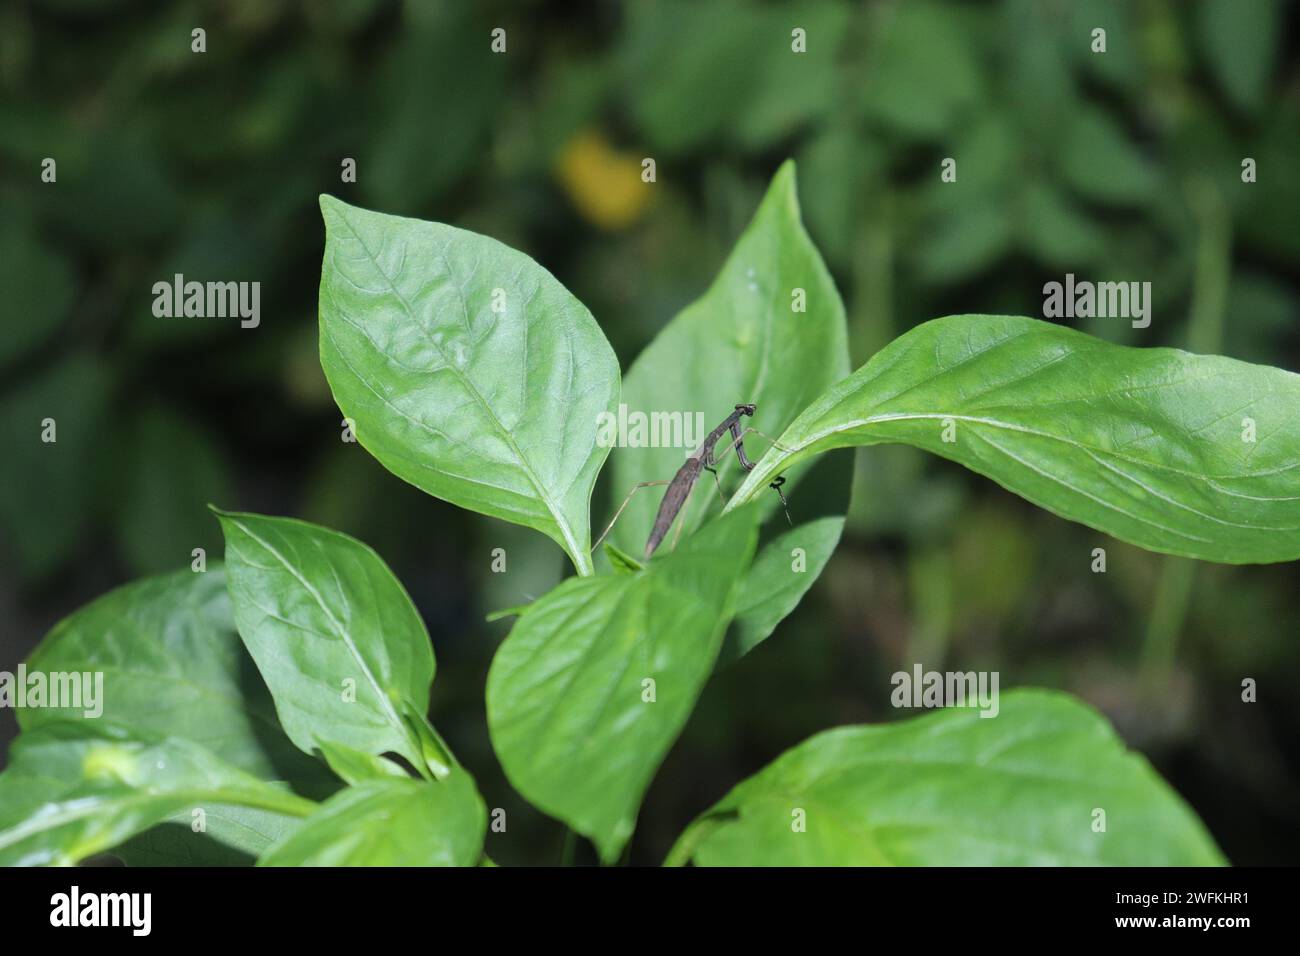 A close-up view of a robust plant with a pair of foliage leaves firmly connected to its stem Stock Photo